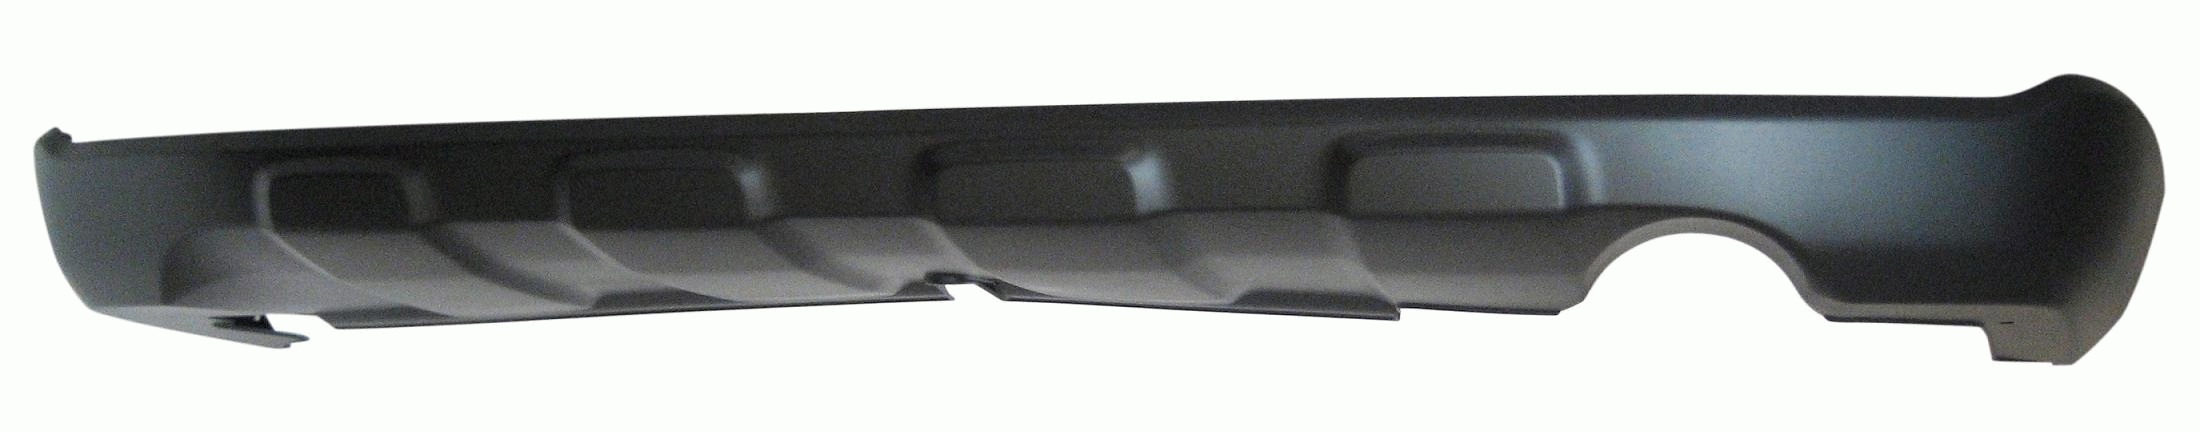 CRV 10-11 Rear LOWER Cover TEXTURED Black USE CAP